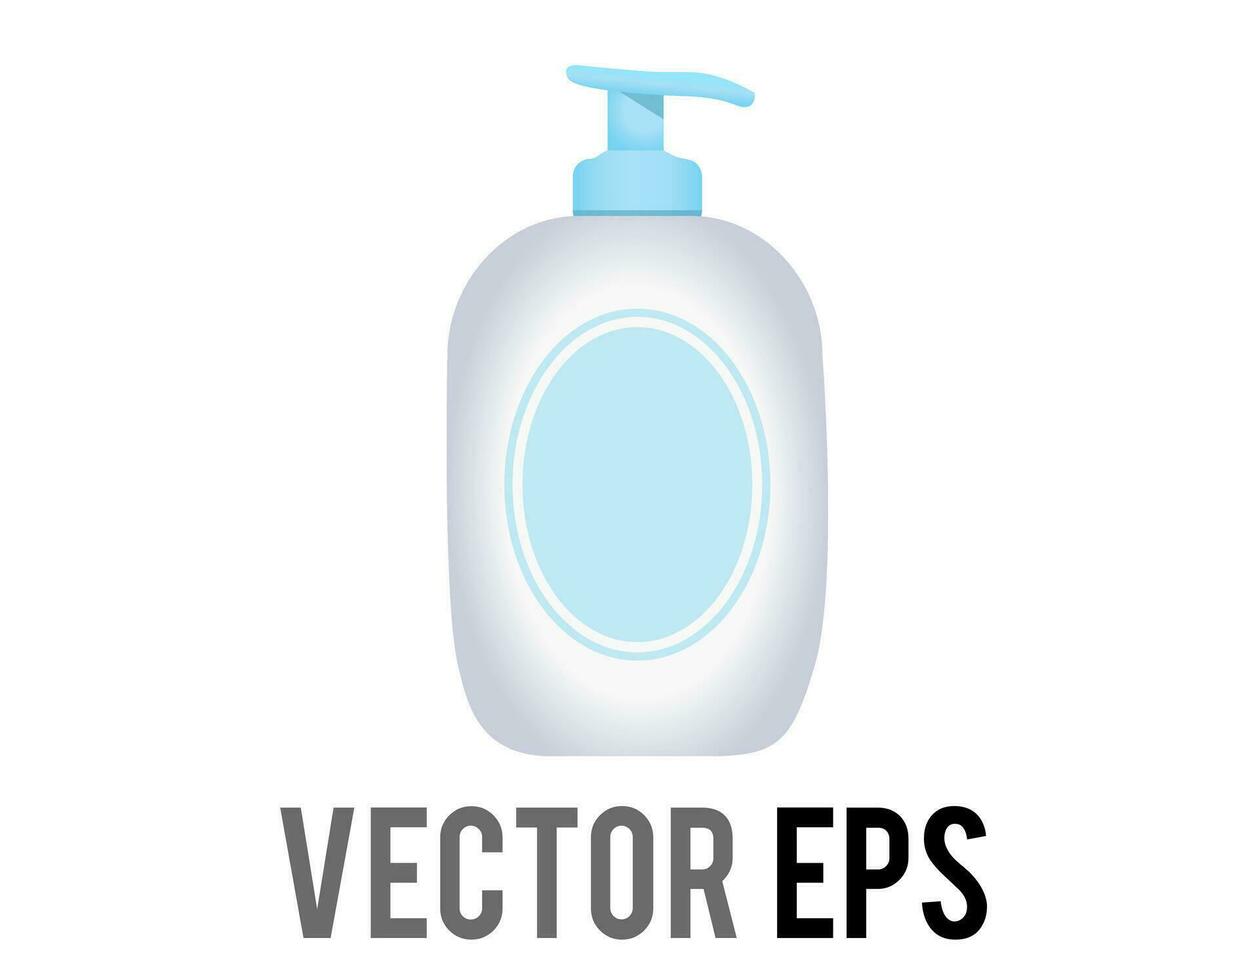 Vector baby blue bottle of skin lotion icon for moisturizer,  sunscreen, sunblock, shampoo and body wash